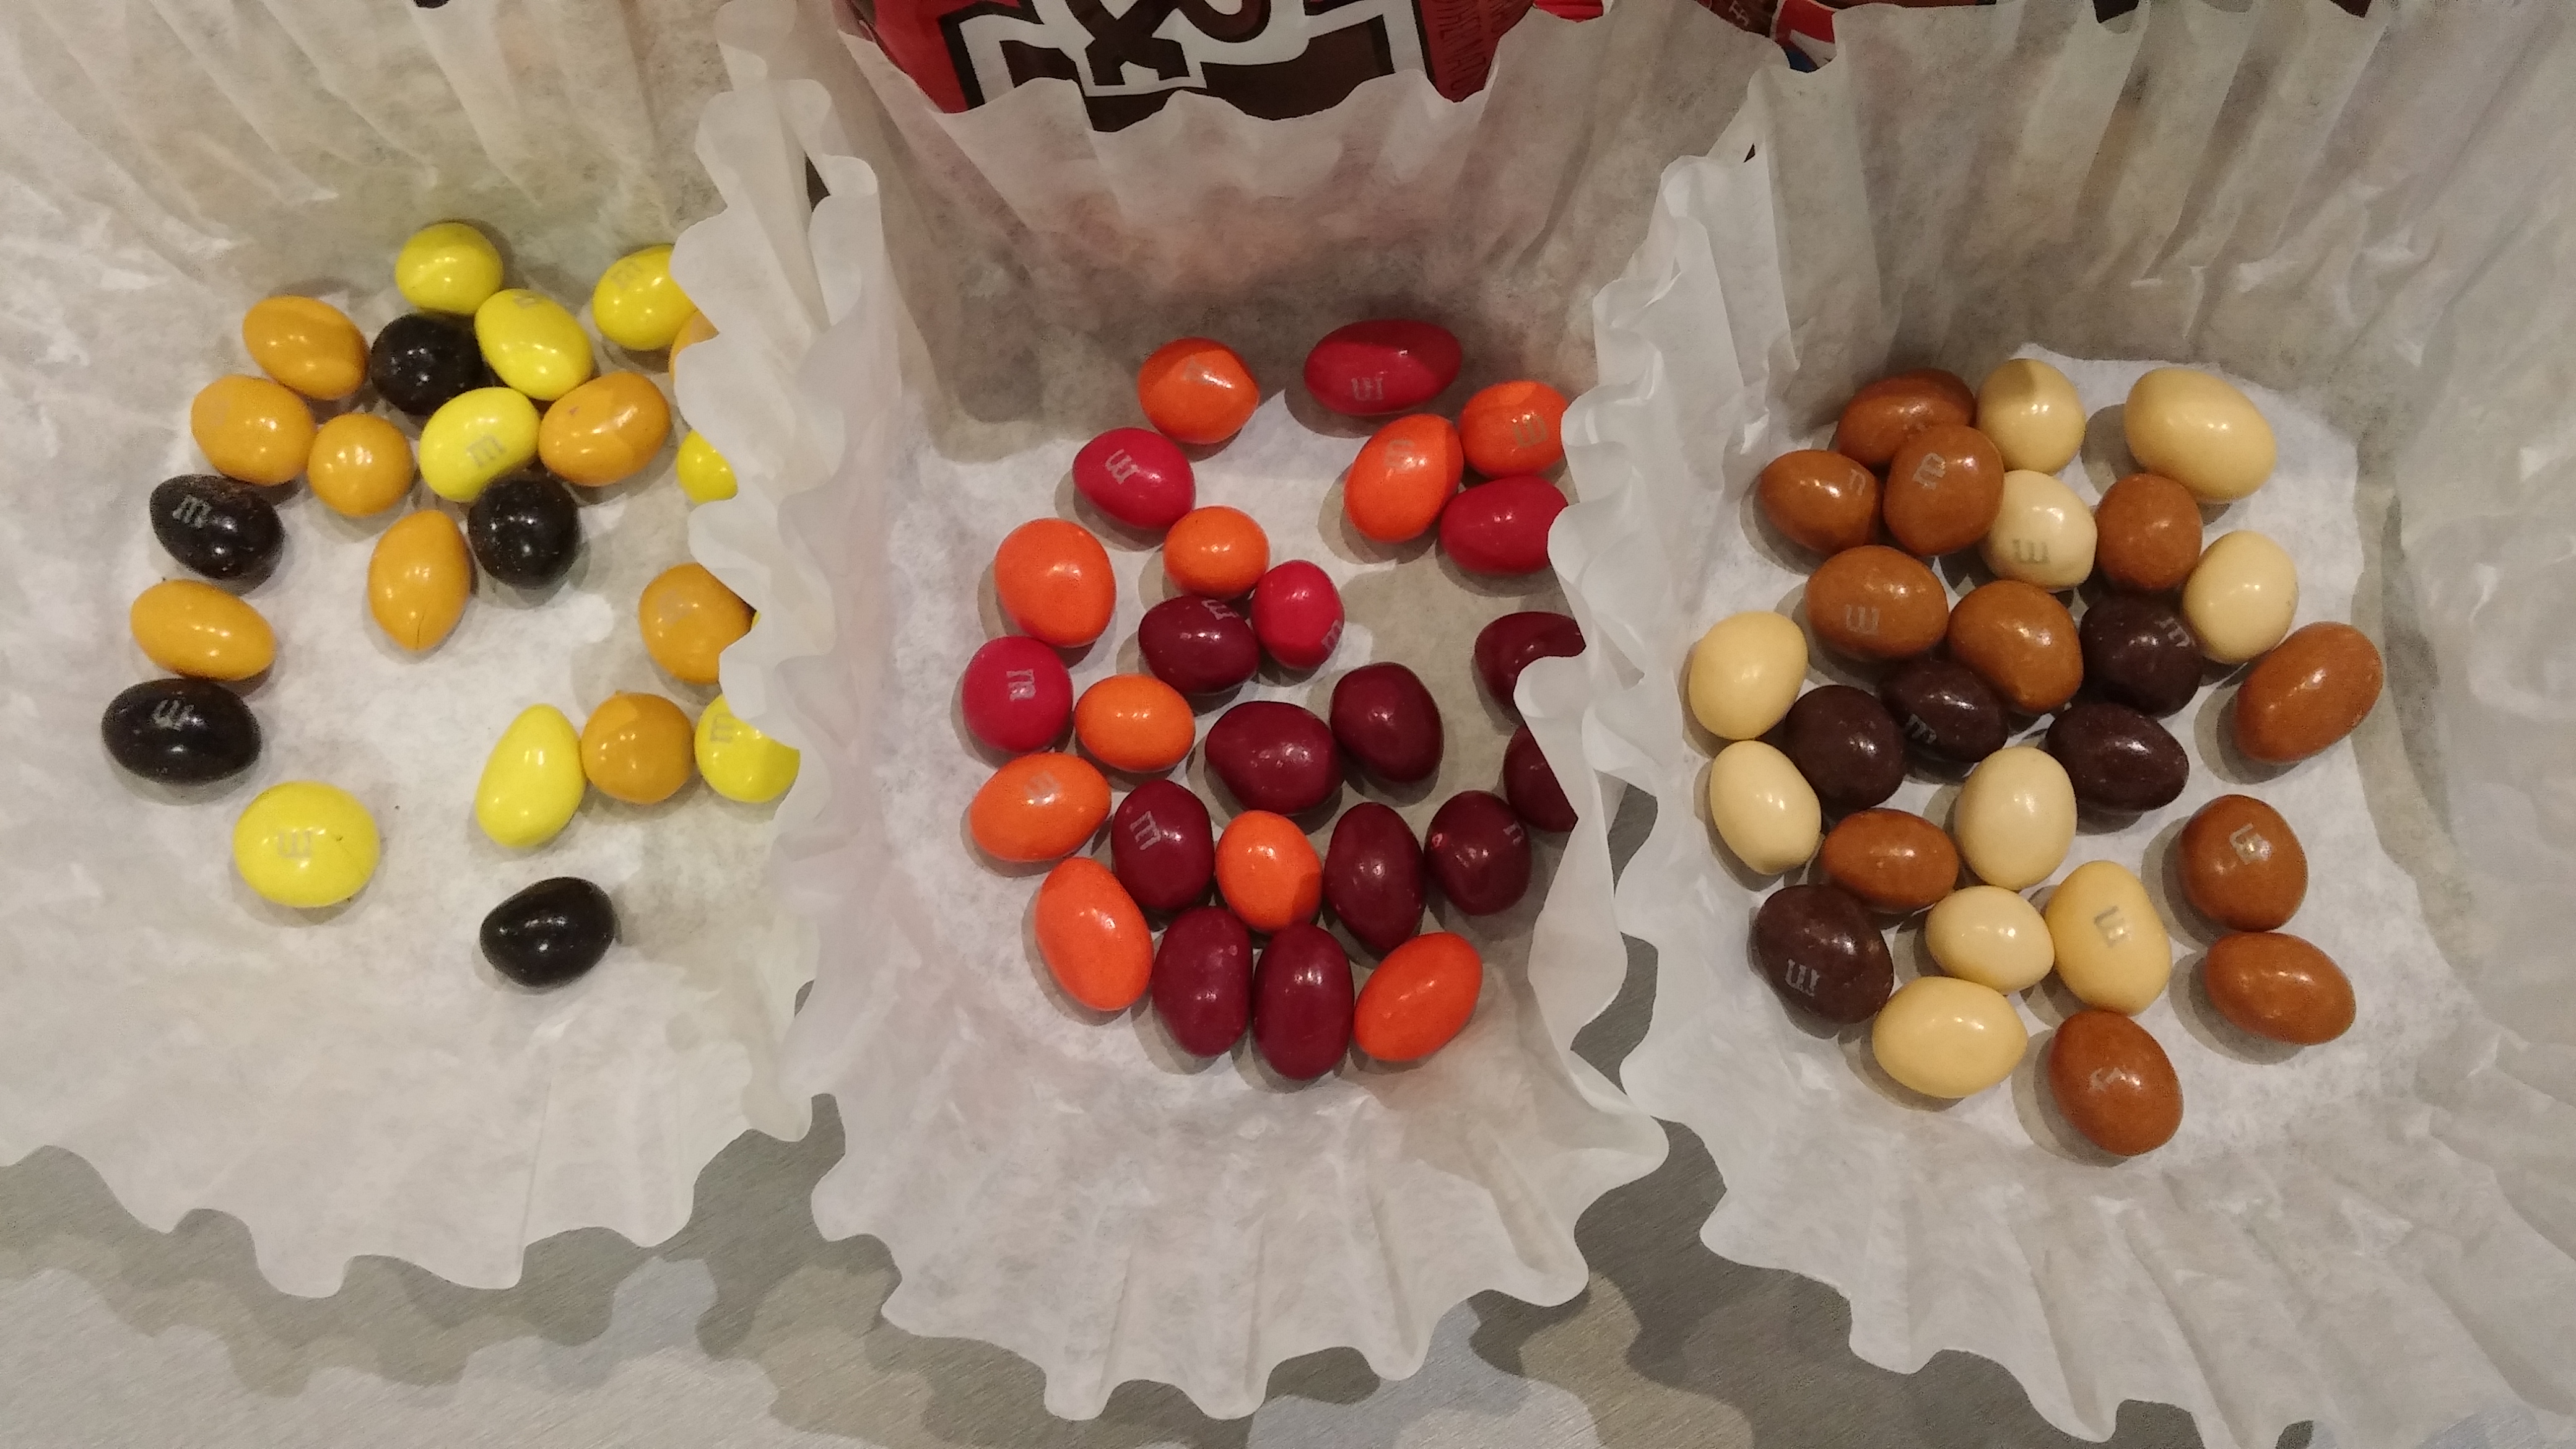 (From left) Honey-Nut M&Ms, Chili-Nut M&Ms and Coffee-Nut M&Ms. (Credit: CBSDetroit.com)